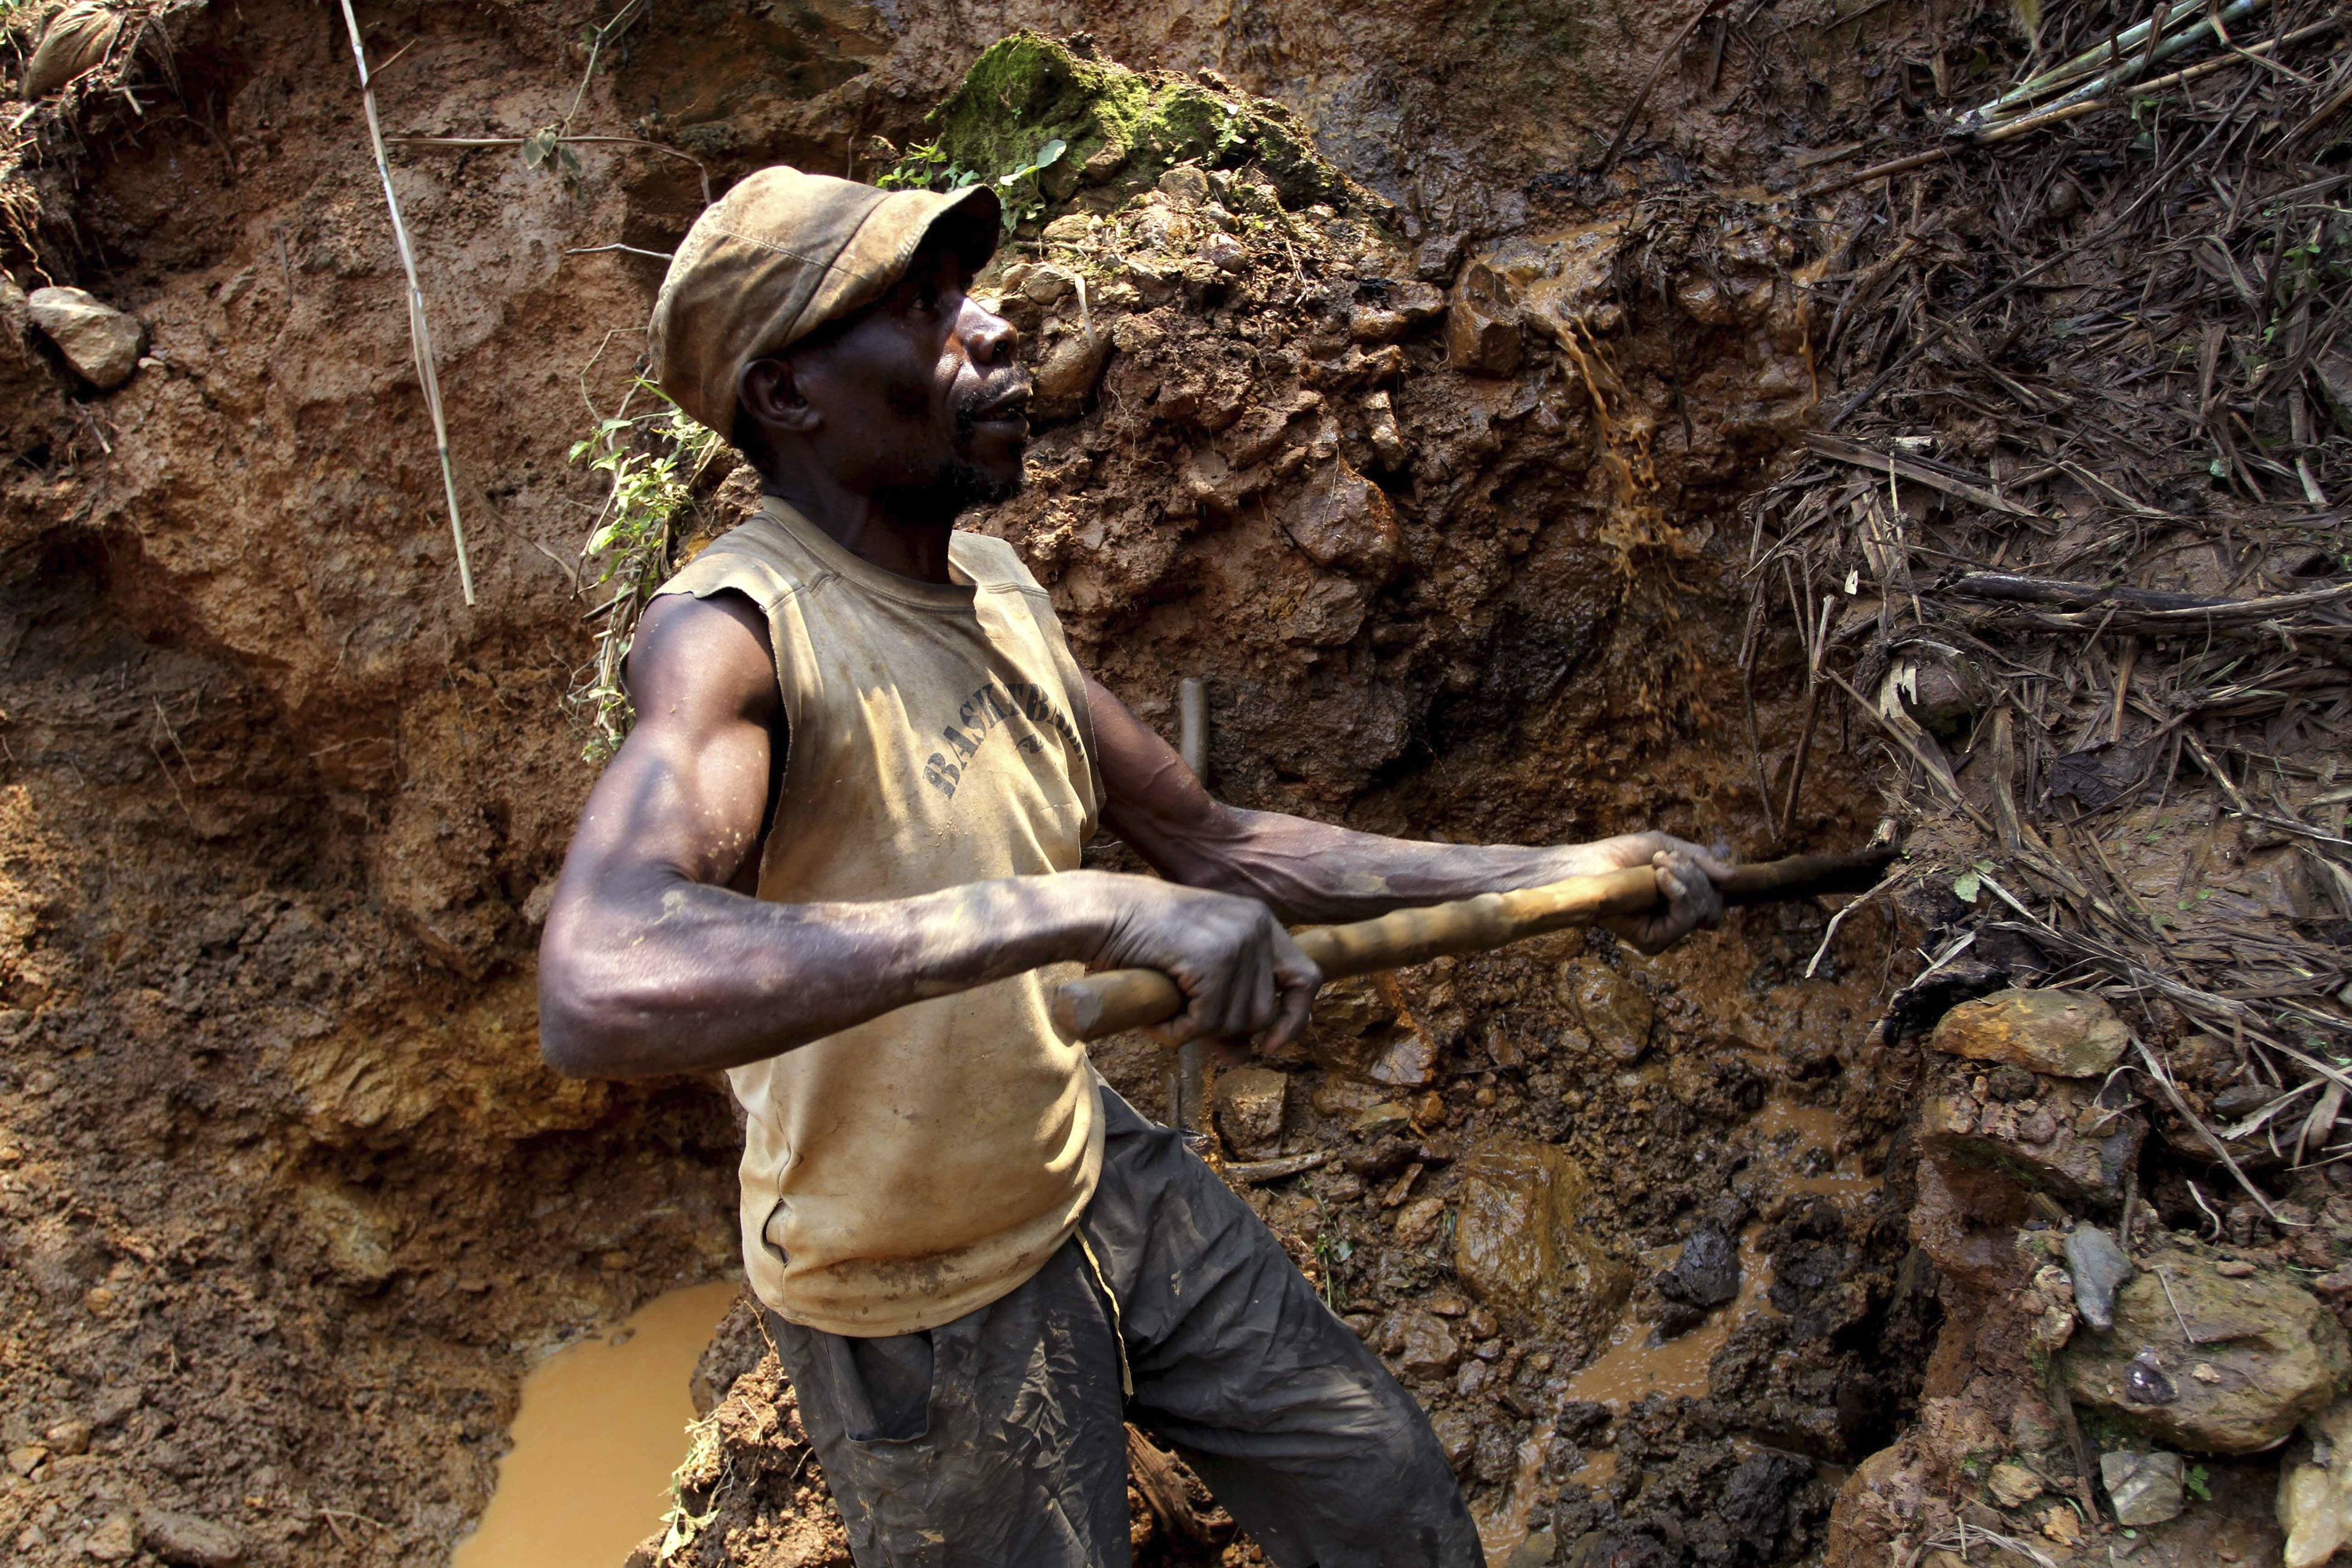 FILE - One of the few remaining miners digs out soil which will later be filtered for traces of cassiterite, the major ore of tin, at Nyabibwe mine, in eastern Congo, on Aug. 17, 2012. The governor of the South Kivu province in eastern Congo on Friday ordered the suspension of all mining activities in order to “restore order” in the mineral-rich region plagued by violence from armed groups. (AP Photo/Marc Hofer, File)